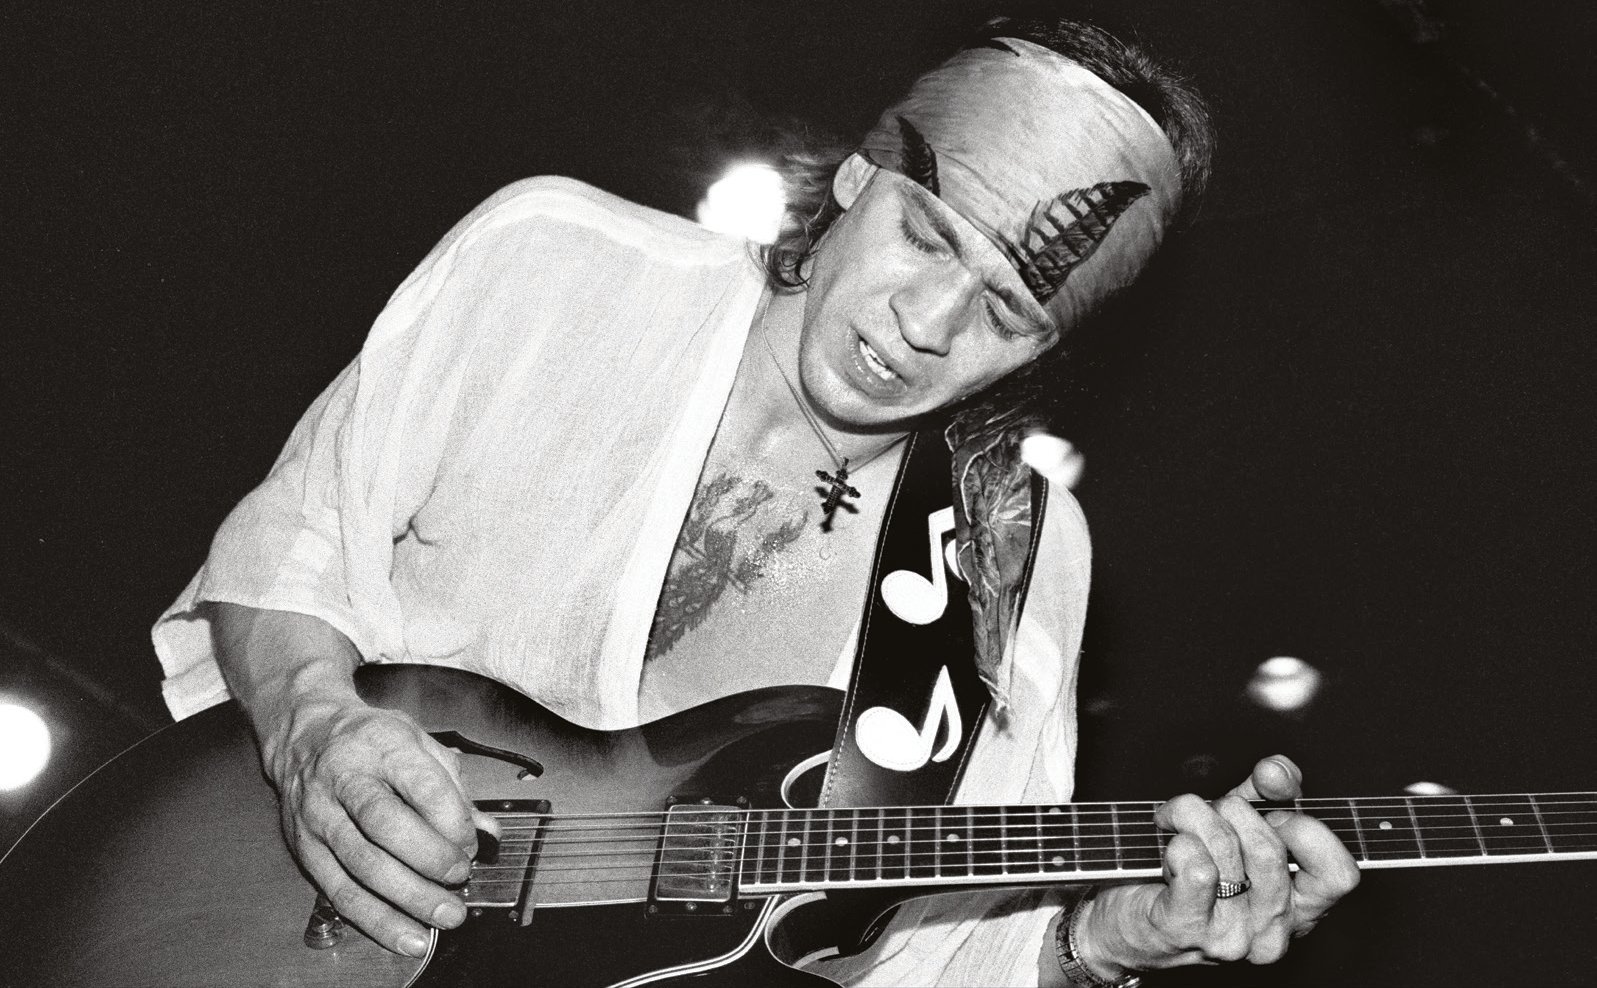 Stevie Ray Vaughan at the Texas Flood album release show in 1983.